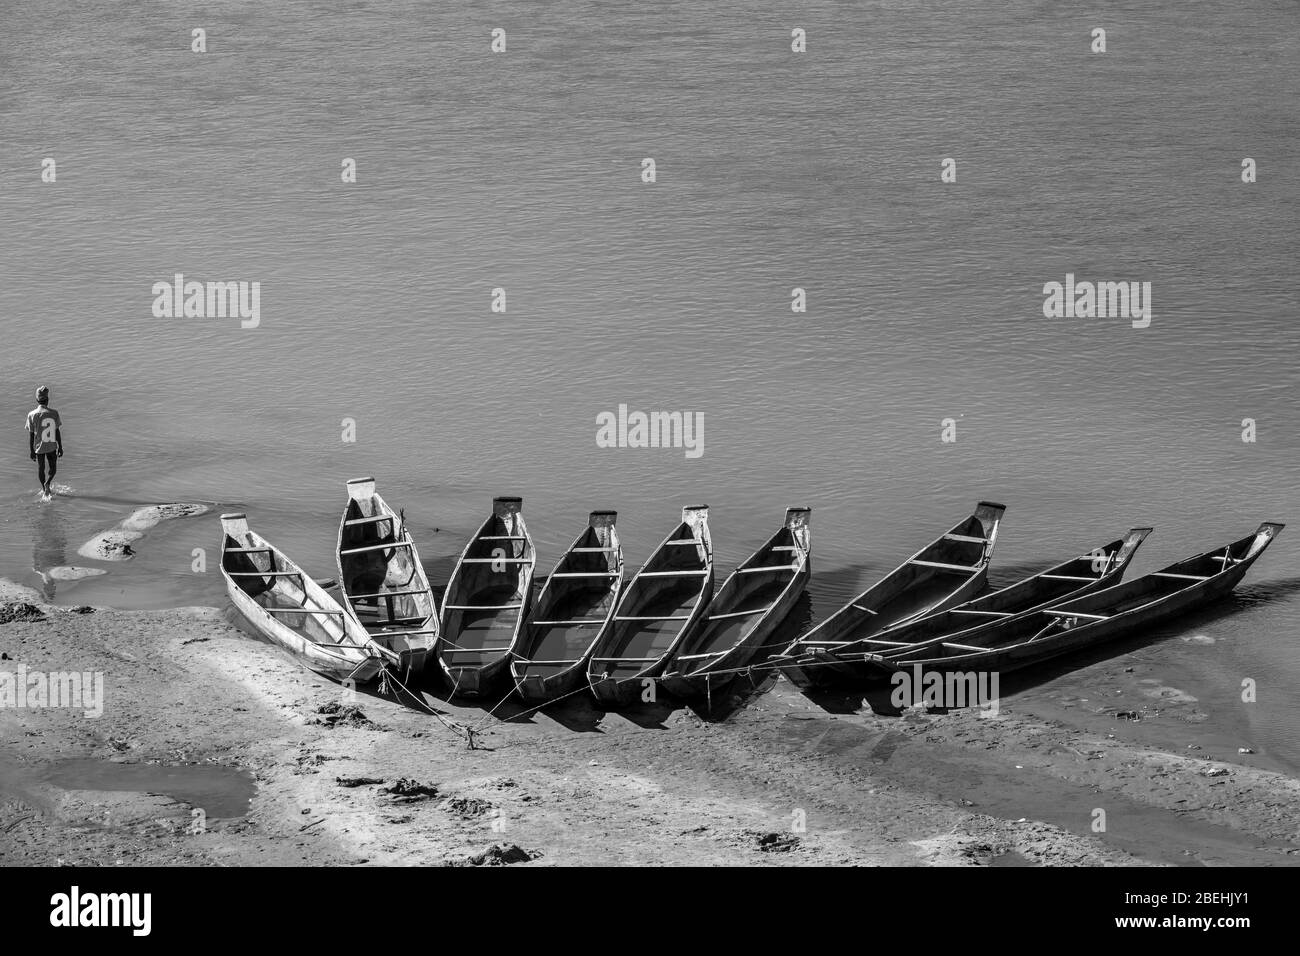 Workers with Boats For Digging Out Gravel from the Goyain River in Jaflong, at the border with India. The gravel will be sieved to make concrete. Stock Photo